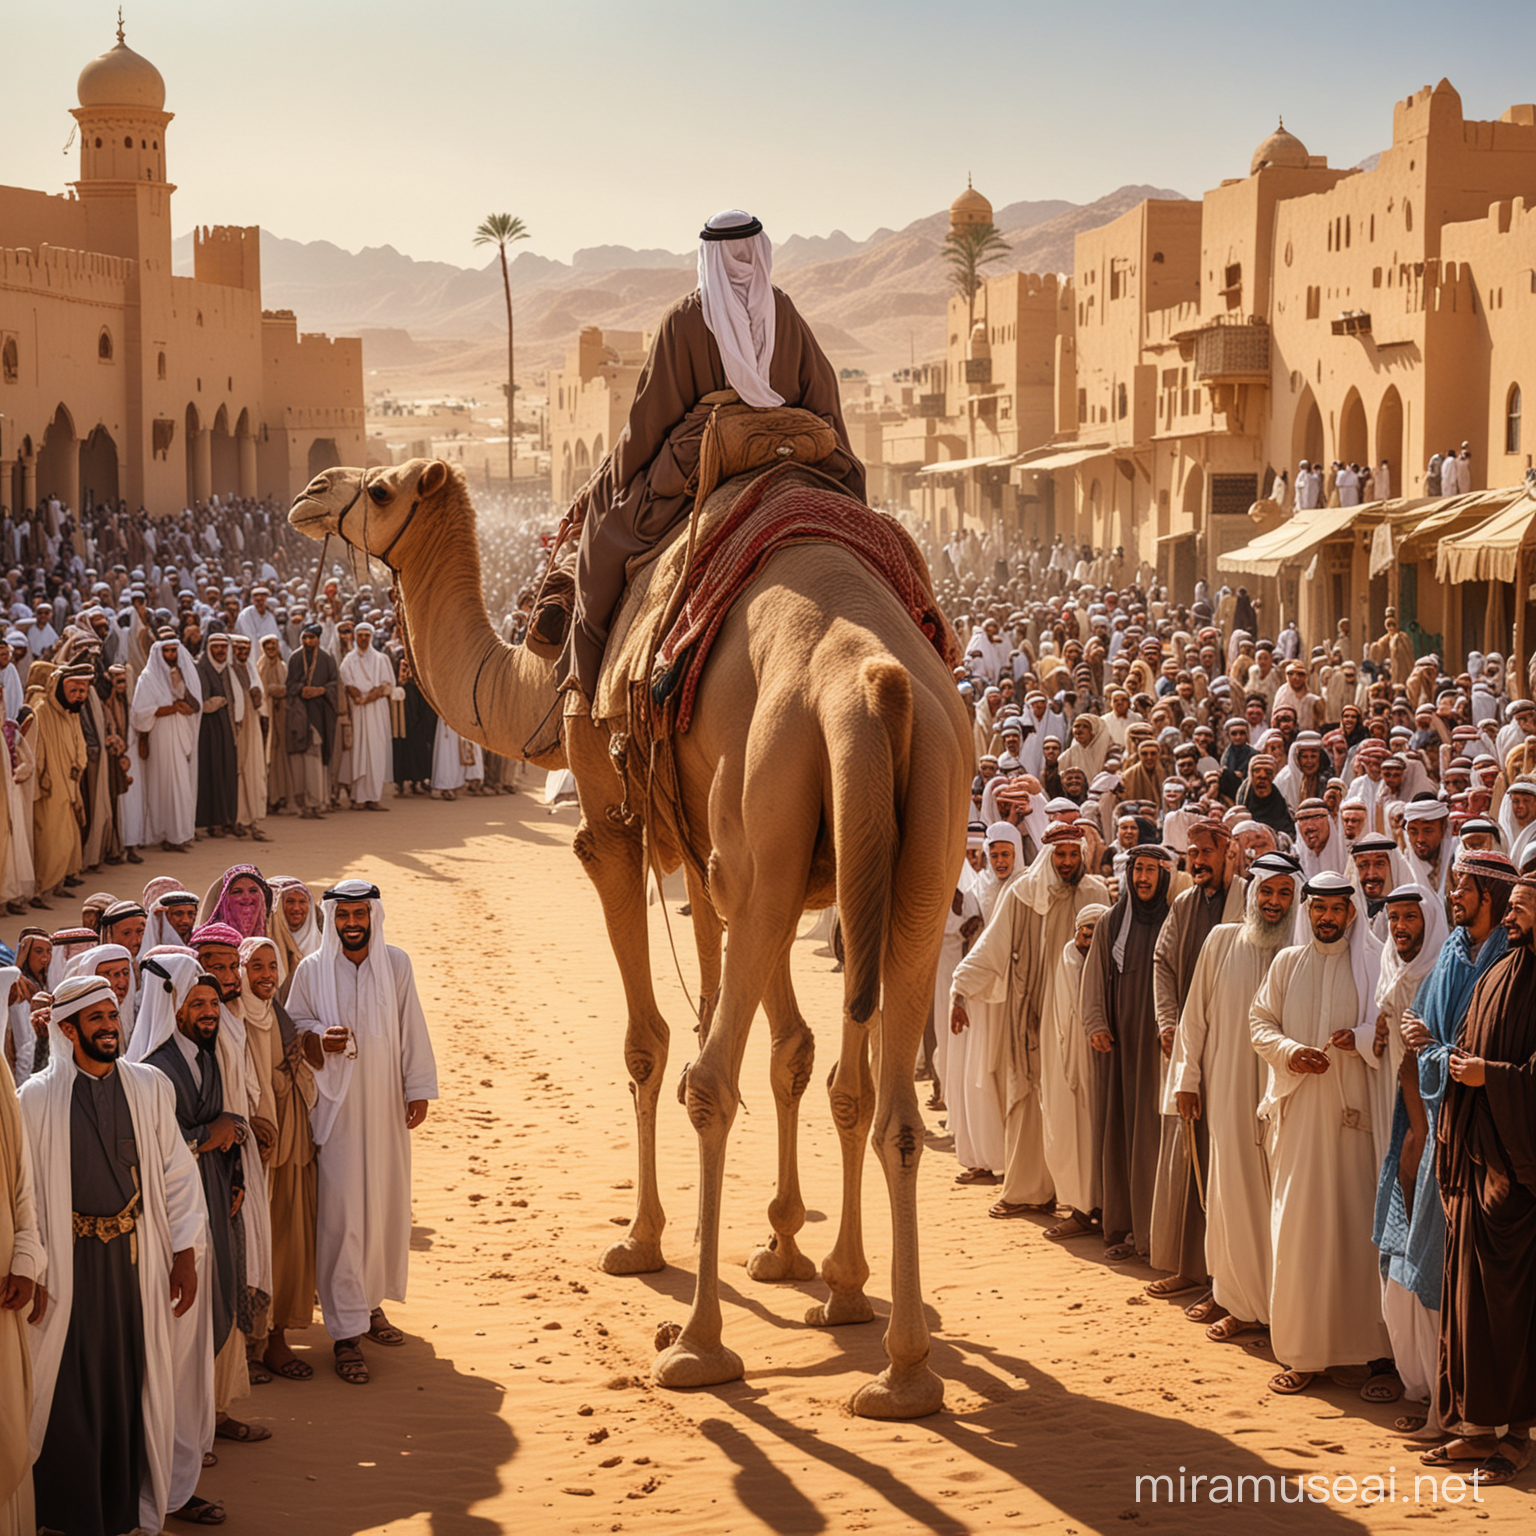 A vivid depiction of madina, saudi arab back in 600 A.D. smiling children looking at an old arab prophet. The whole traditional villagers came out to see him, seen from the back, walks on a camel  meets a group of people, a sunny day, detailed.